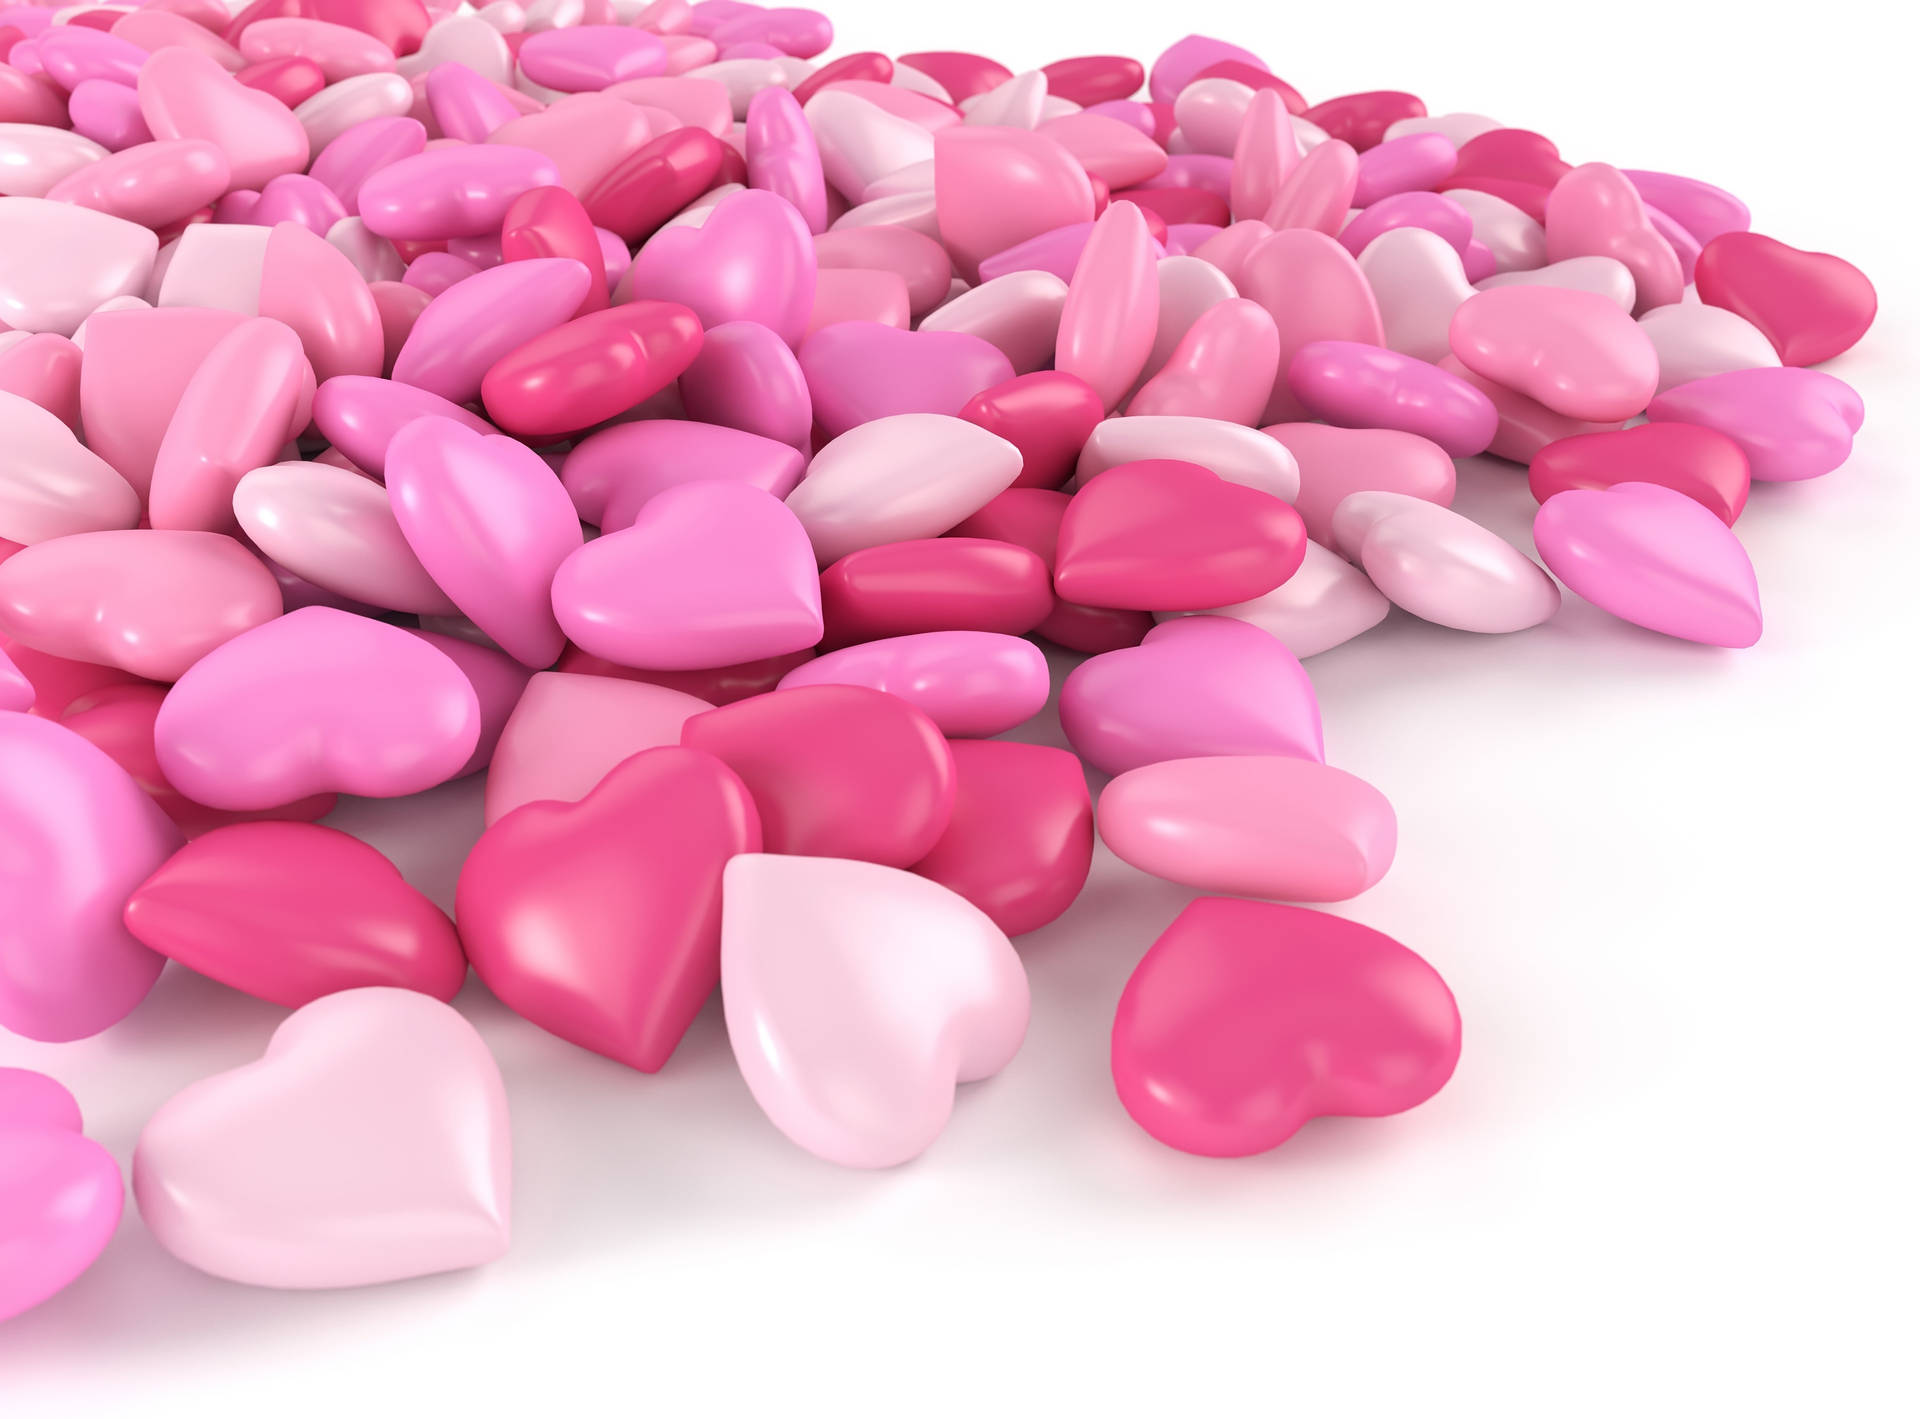 Pink Heart Stones Background